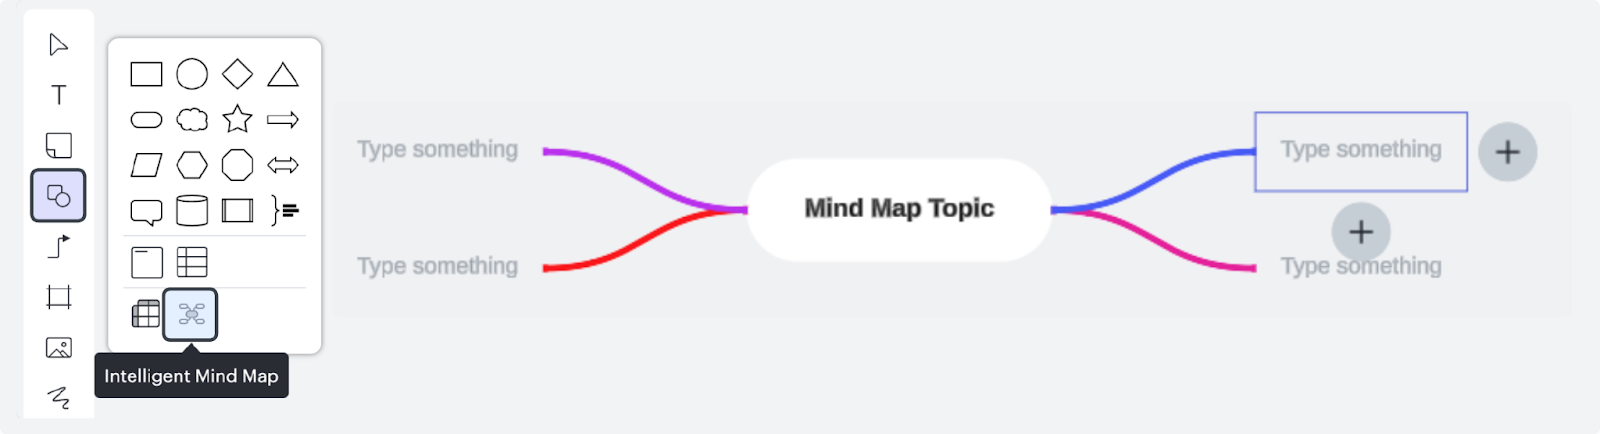 New Feature: Intelligent Mind Map in Lucidspark | Community